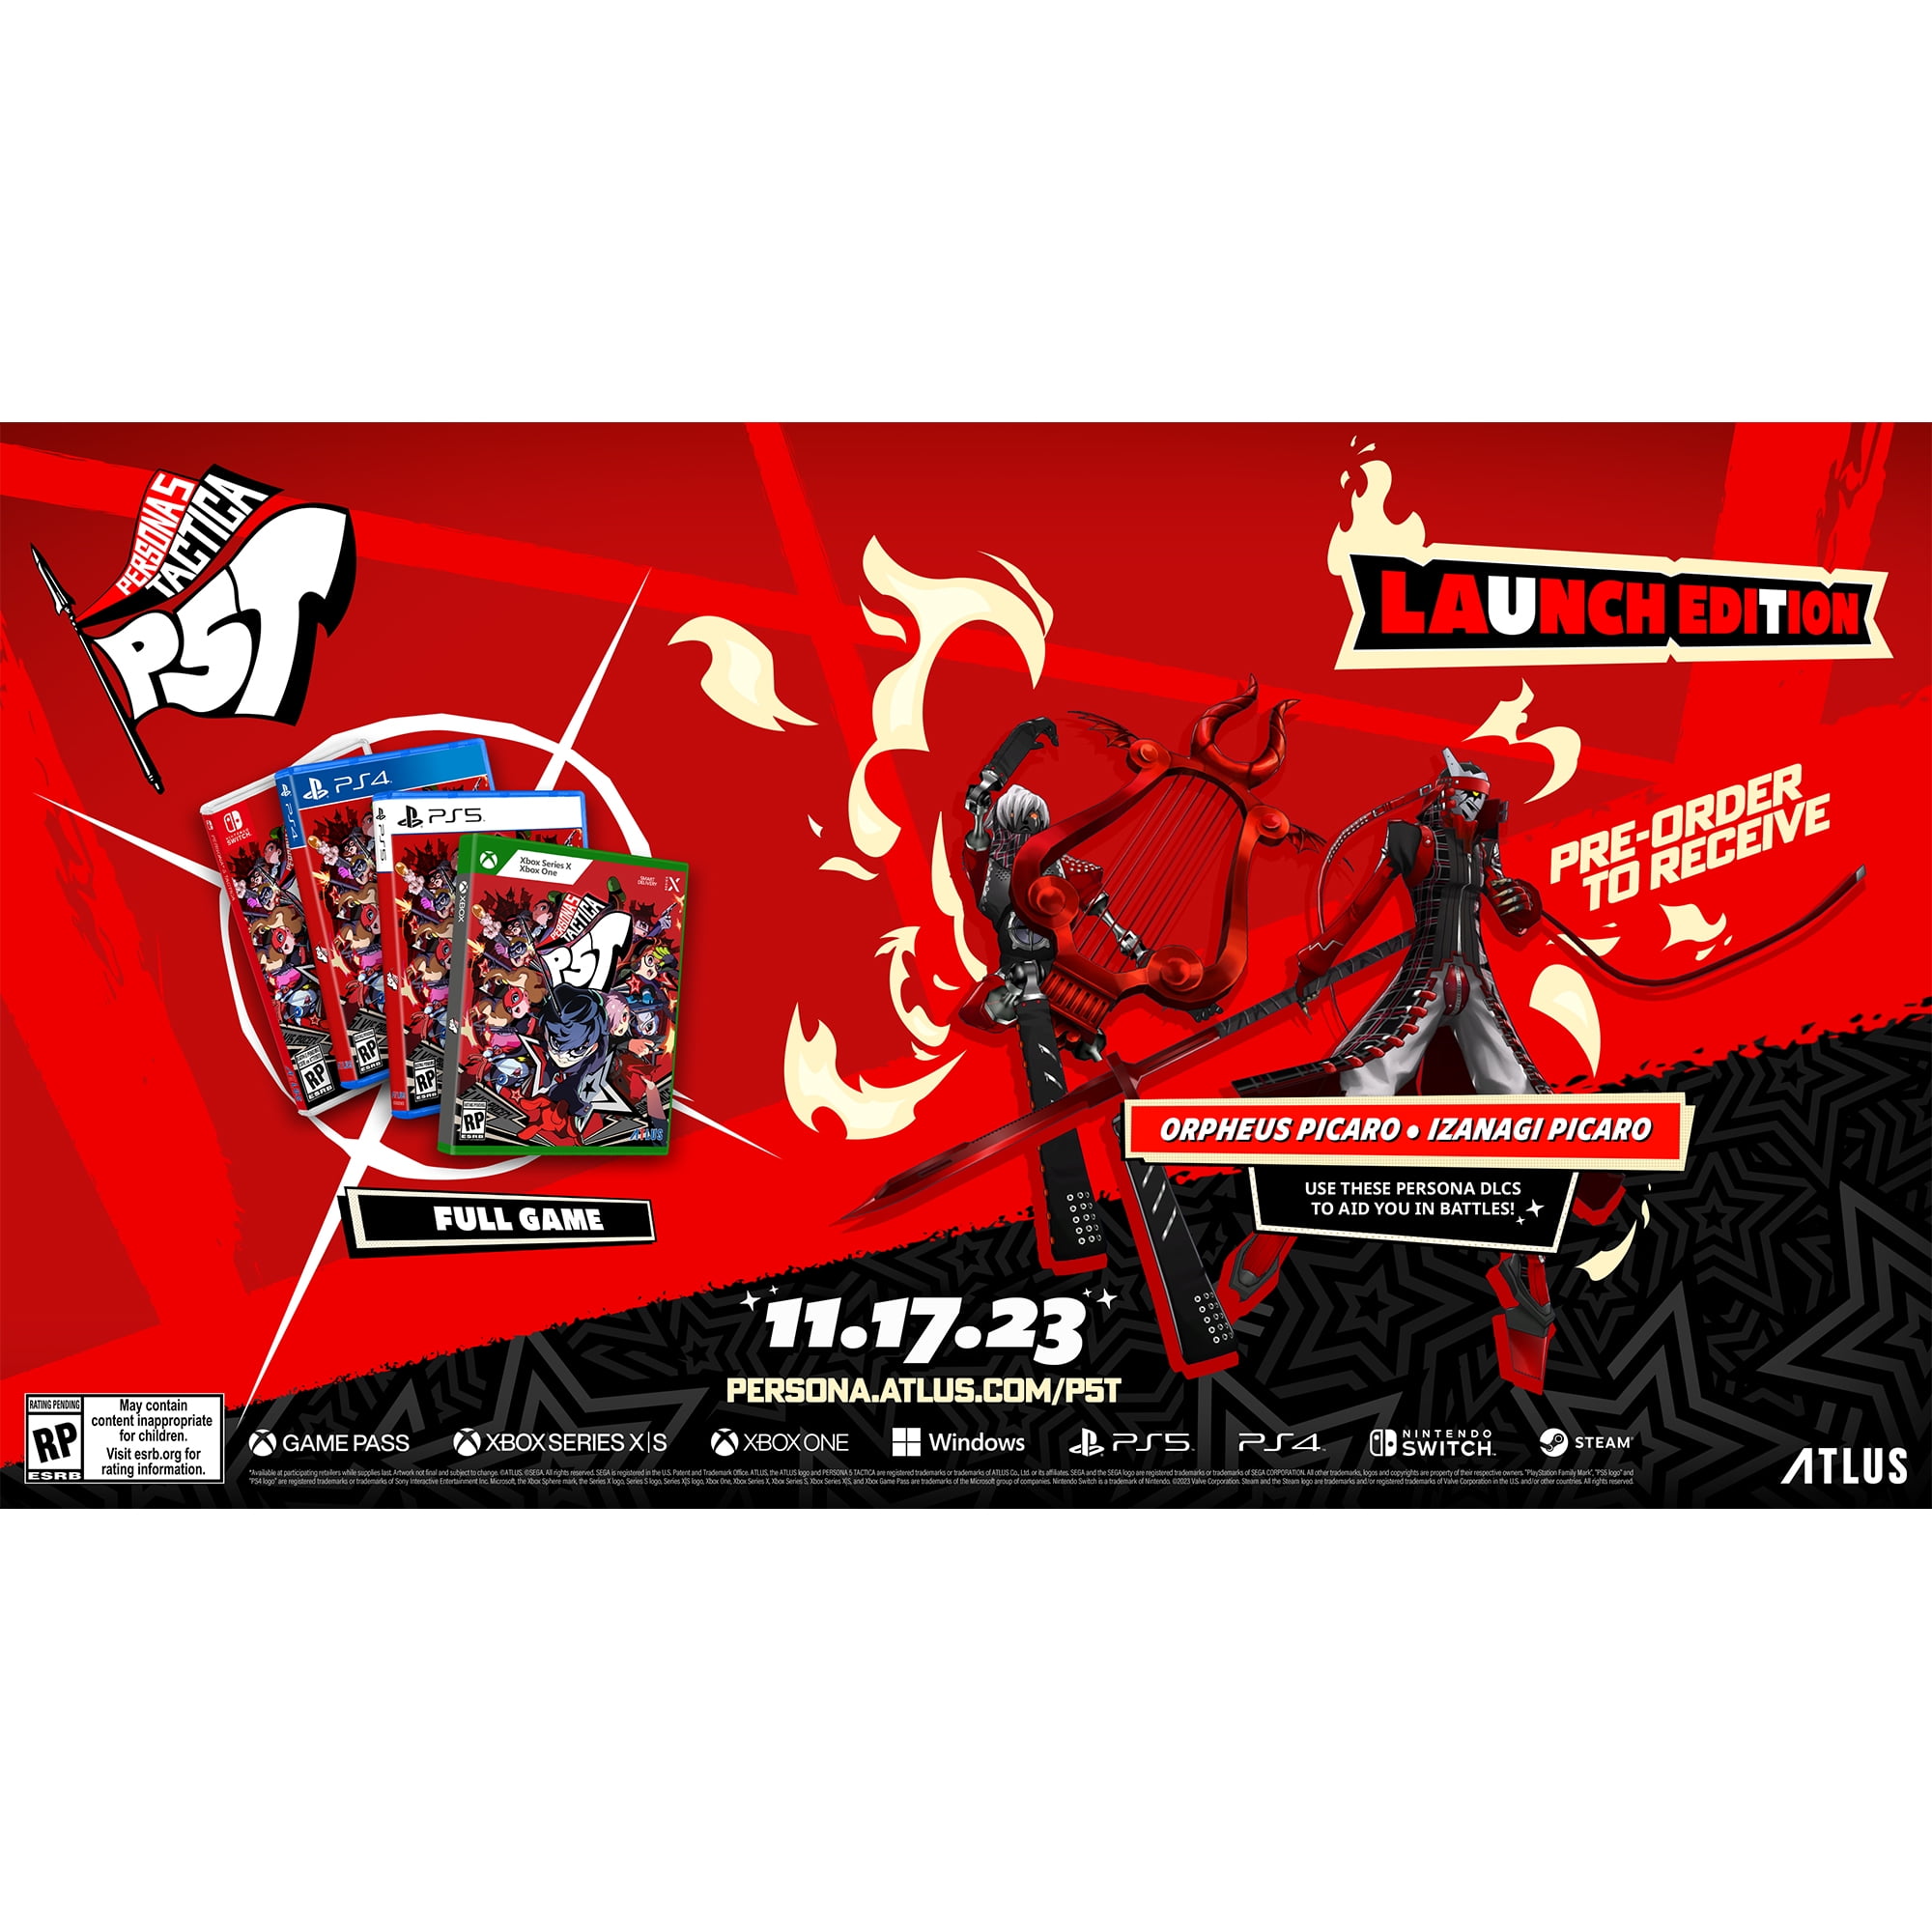 Switch ver.) Persona 5 Tactica - Famitsu DS Pack w/ T-shirt (XL size)  (Limited Edition)